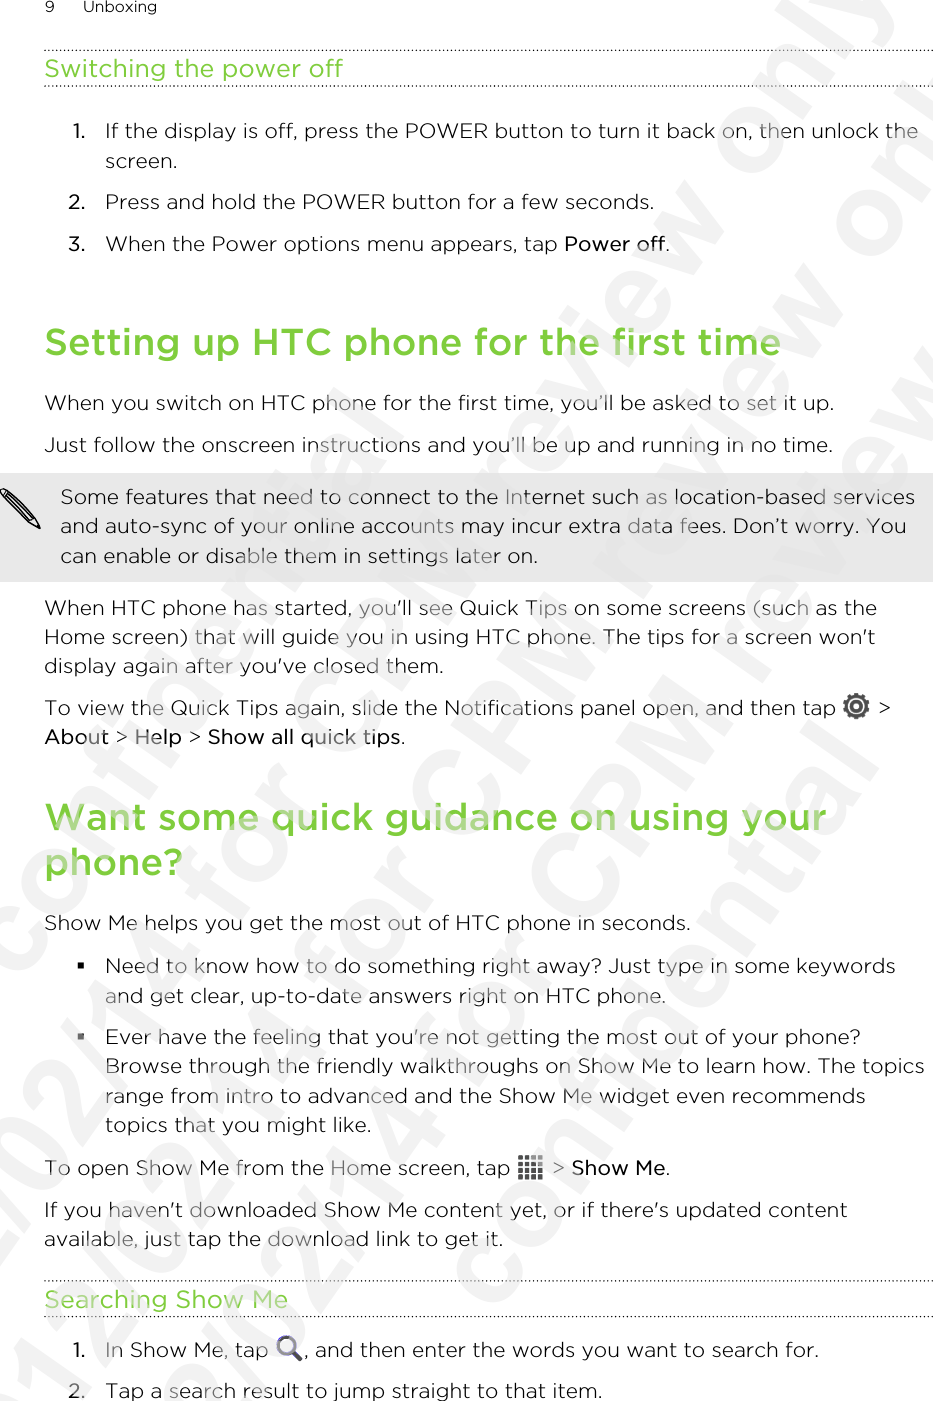 Switching the power off1. If the display is off, press the POWER button to turn it back on, then unlock thescreen.2. Press and hold the POWER button for a few seconds.3. When the Power options menu appears, tap Power off.Setting up HTC phone for the first timeWhen you switch on HTC phone for the first time, you’ll be asked to set it up.Just follow the onscreen instructions and you’ll be up and running in no time. Some features that need to connect to the Internet such as location-based servicesand auto-sync of your online accounts may incur extra data fees. Don’t worry. Youcan enable or disable them in settings later on.When HTC phone has started, you&apos;ll see Quick Tips on some screens (such as theHome screen) that will guide you in using HTC phone. The tips for a screen won&apos;tdisplay again after you&apos;ve closed them.To view the Quick Tips again, slide the Notifications panel open, and then tap   &gt;About &gt; Help &gt; Show all quick tips.Want some quick guidance on using yourphone?Show Me helps you get the most out of HTC phone in seconds.§Need to know how to do something right away? Just type in some keywordsand get clear, up-to-date answers right on HTC phone.§Ever have the feeling that you&apos;re not getting the most out of your phone?Browse through the friendly walkthroughs on Show Me to learn how. The topicsrange from intro to advanced and the Show Me widget even recommendstopics that you might like.To open Show Me from the Home screen, tap   &gt; Show Me.If you haven&apos;t downloaded Show Me content yet, or if there&apos;s updated contentavailable, just tap the download link to get it.Searching Show Me1. In Show Me, tap  , and then enter the words you want to search for.2. Tap a search result to jump straight to that item.9 Unboxing              confidential 2012/02/14 for CPM review only 2012/02/14 for CPM review only 2012/02/14 for CPM review only               confidential